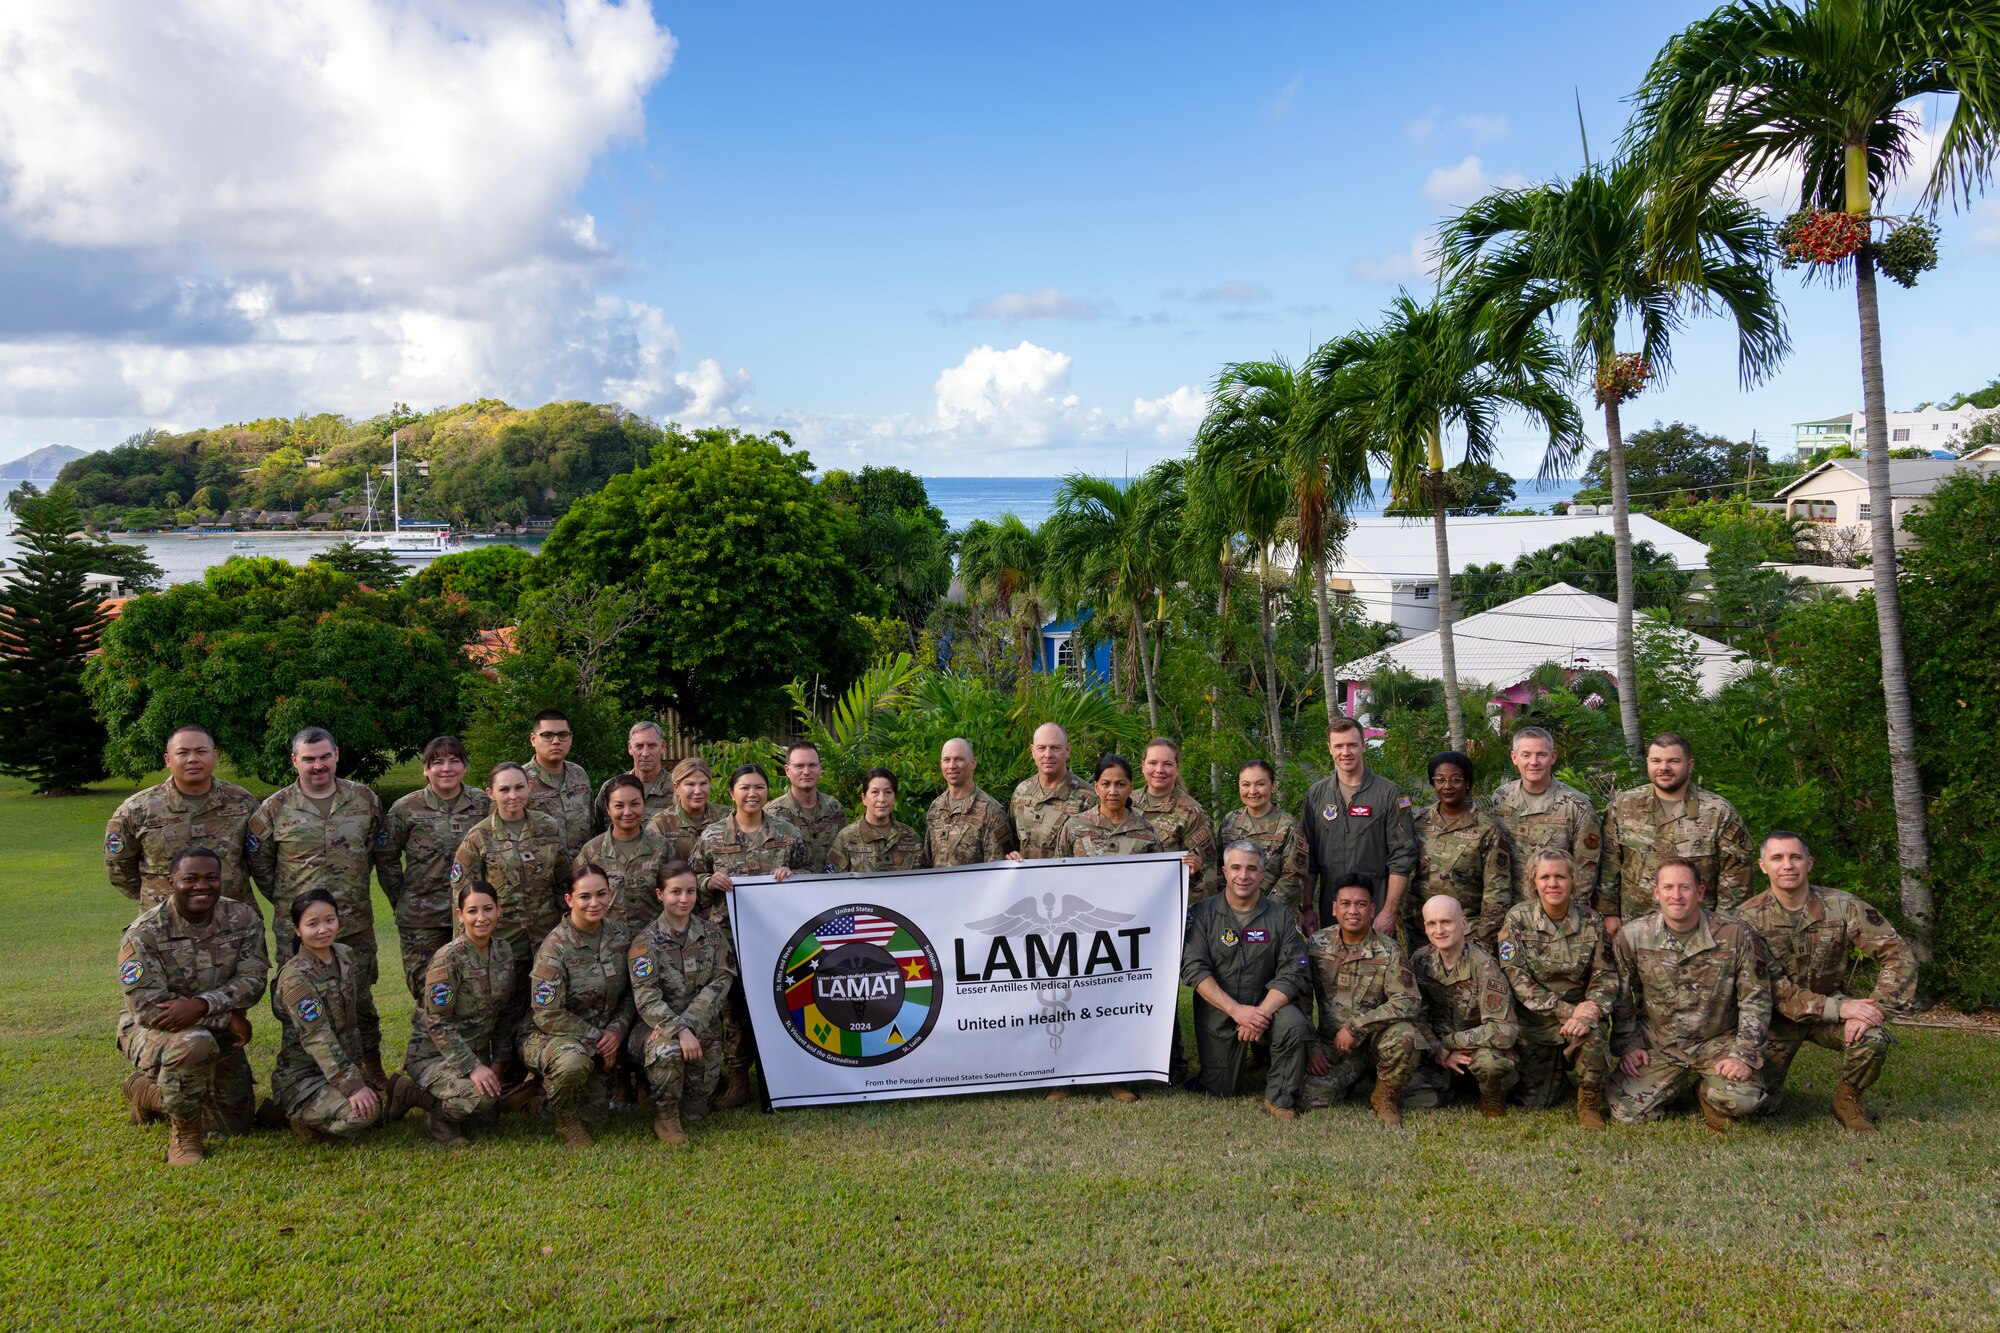 U.S. Air Force active duty and reserve personnel stand in formation for a group photo during the Lesser Antilles Medical Assistance Team mission in St. Vincent and the Grenadines, March 3, 2024. This is the first opportunity for the U.S. Southern Command directed medical team to collaborate and partner with St. Vincent medical professionals to deliver support and resources to the island nation and its healthcare system. (U.S. Air Force photo by Tech. Sgt. Rachel Maxwell)